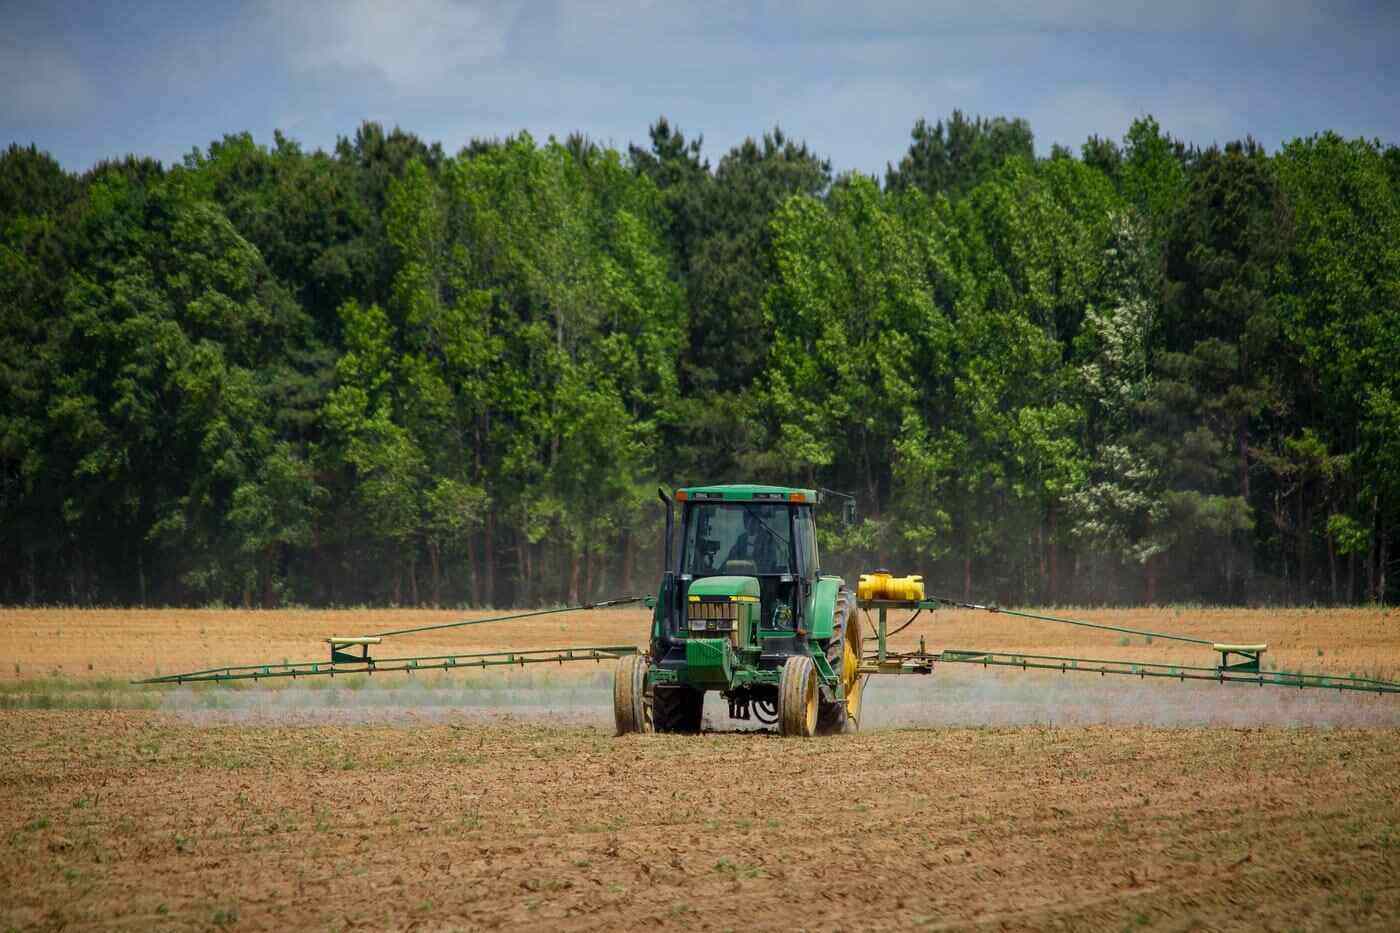 tractor spraying crop - the not-so-secret dangers of paraquat and how it affects you